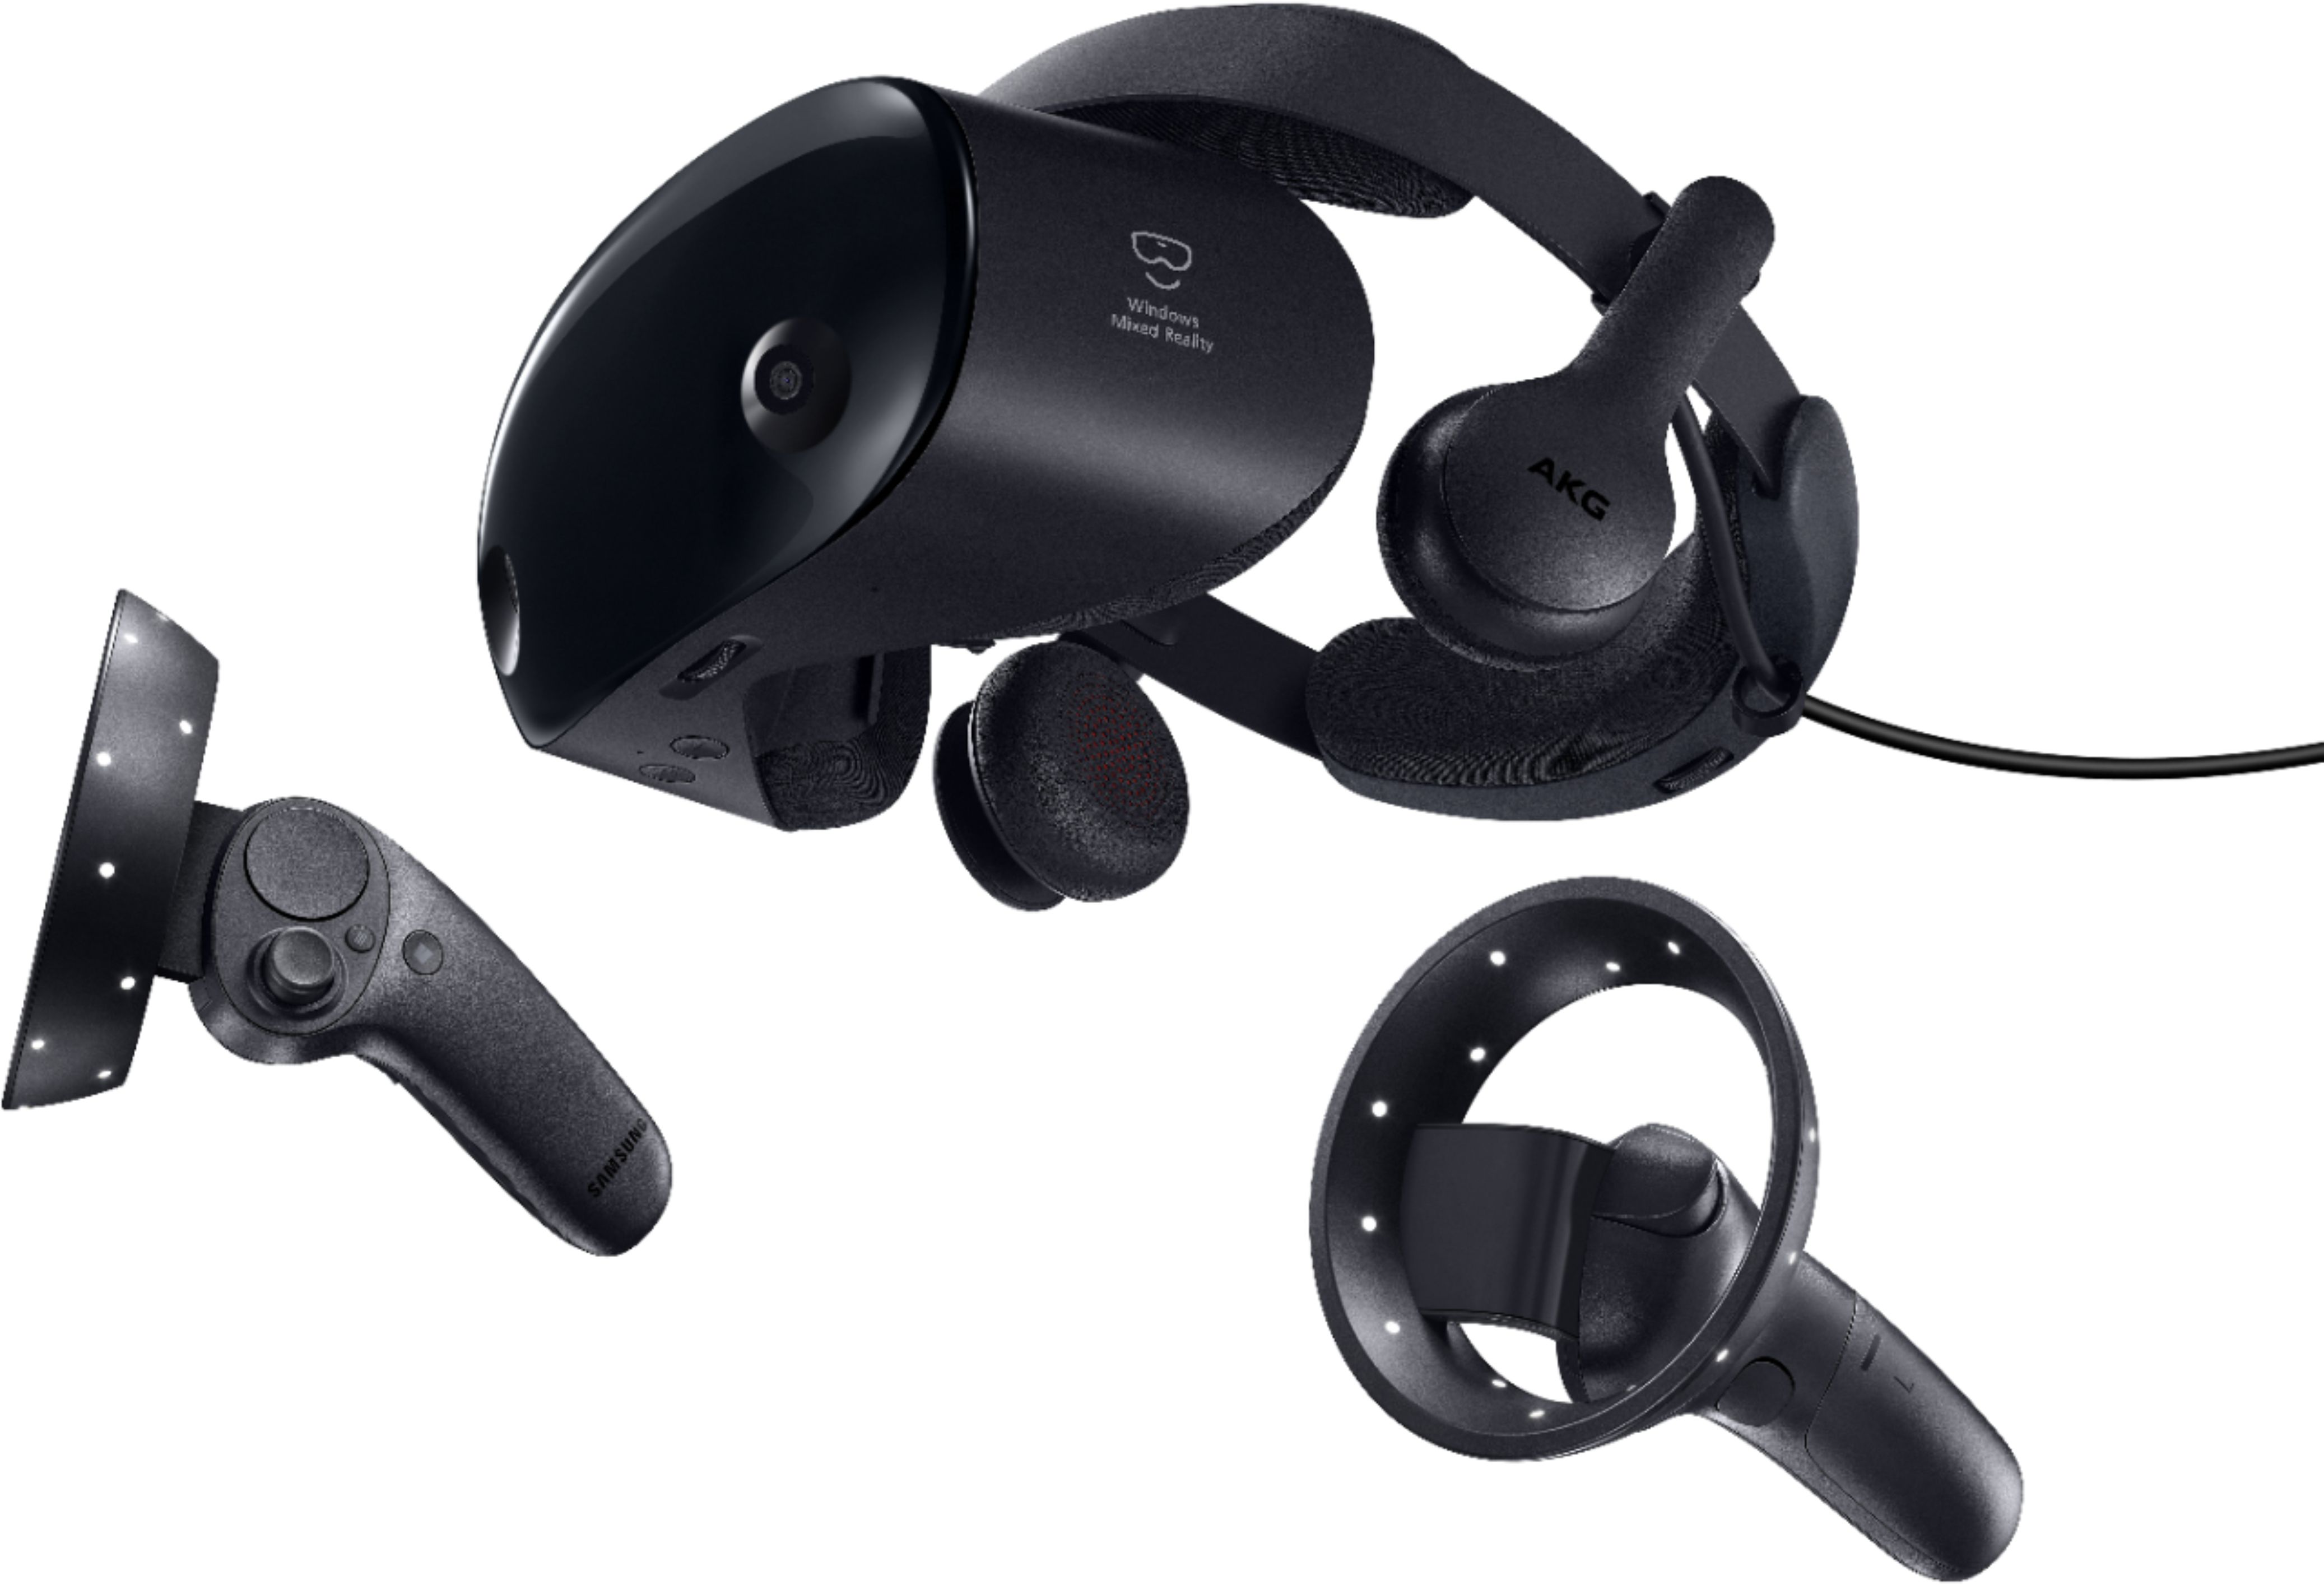 Best Buy: Samsung Odyssey Virtual Reality Headset for Compatible Windows PCs